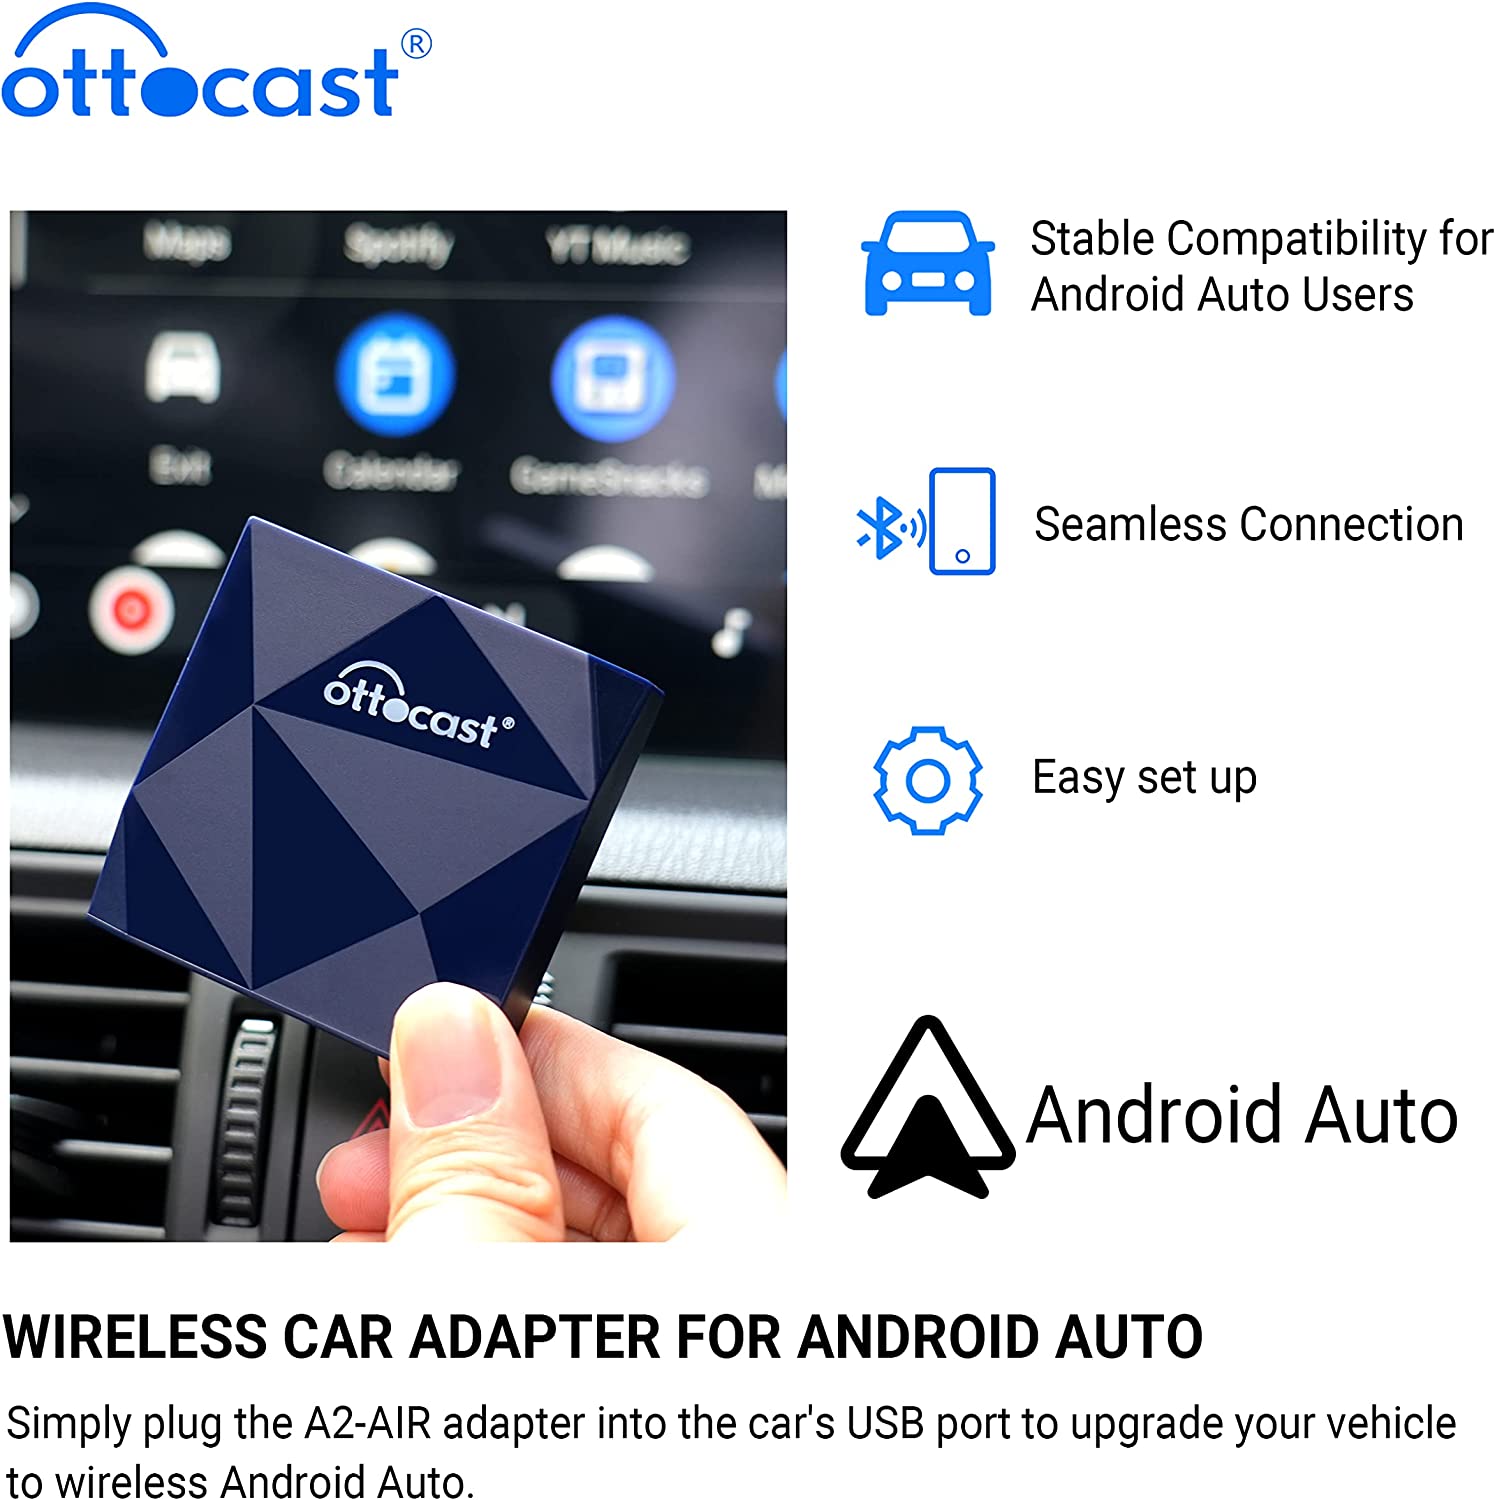 Wireless Android Auto Adapter - Convert Wired Android Auto to Wireless